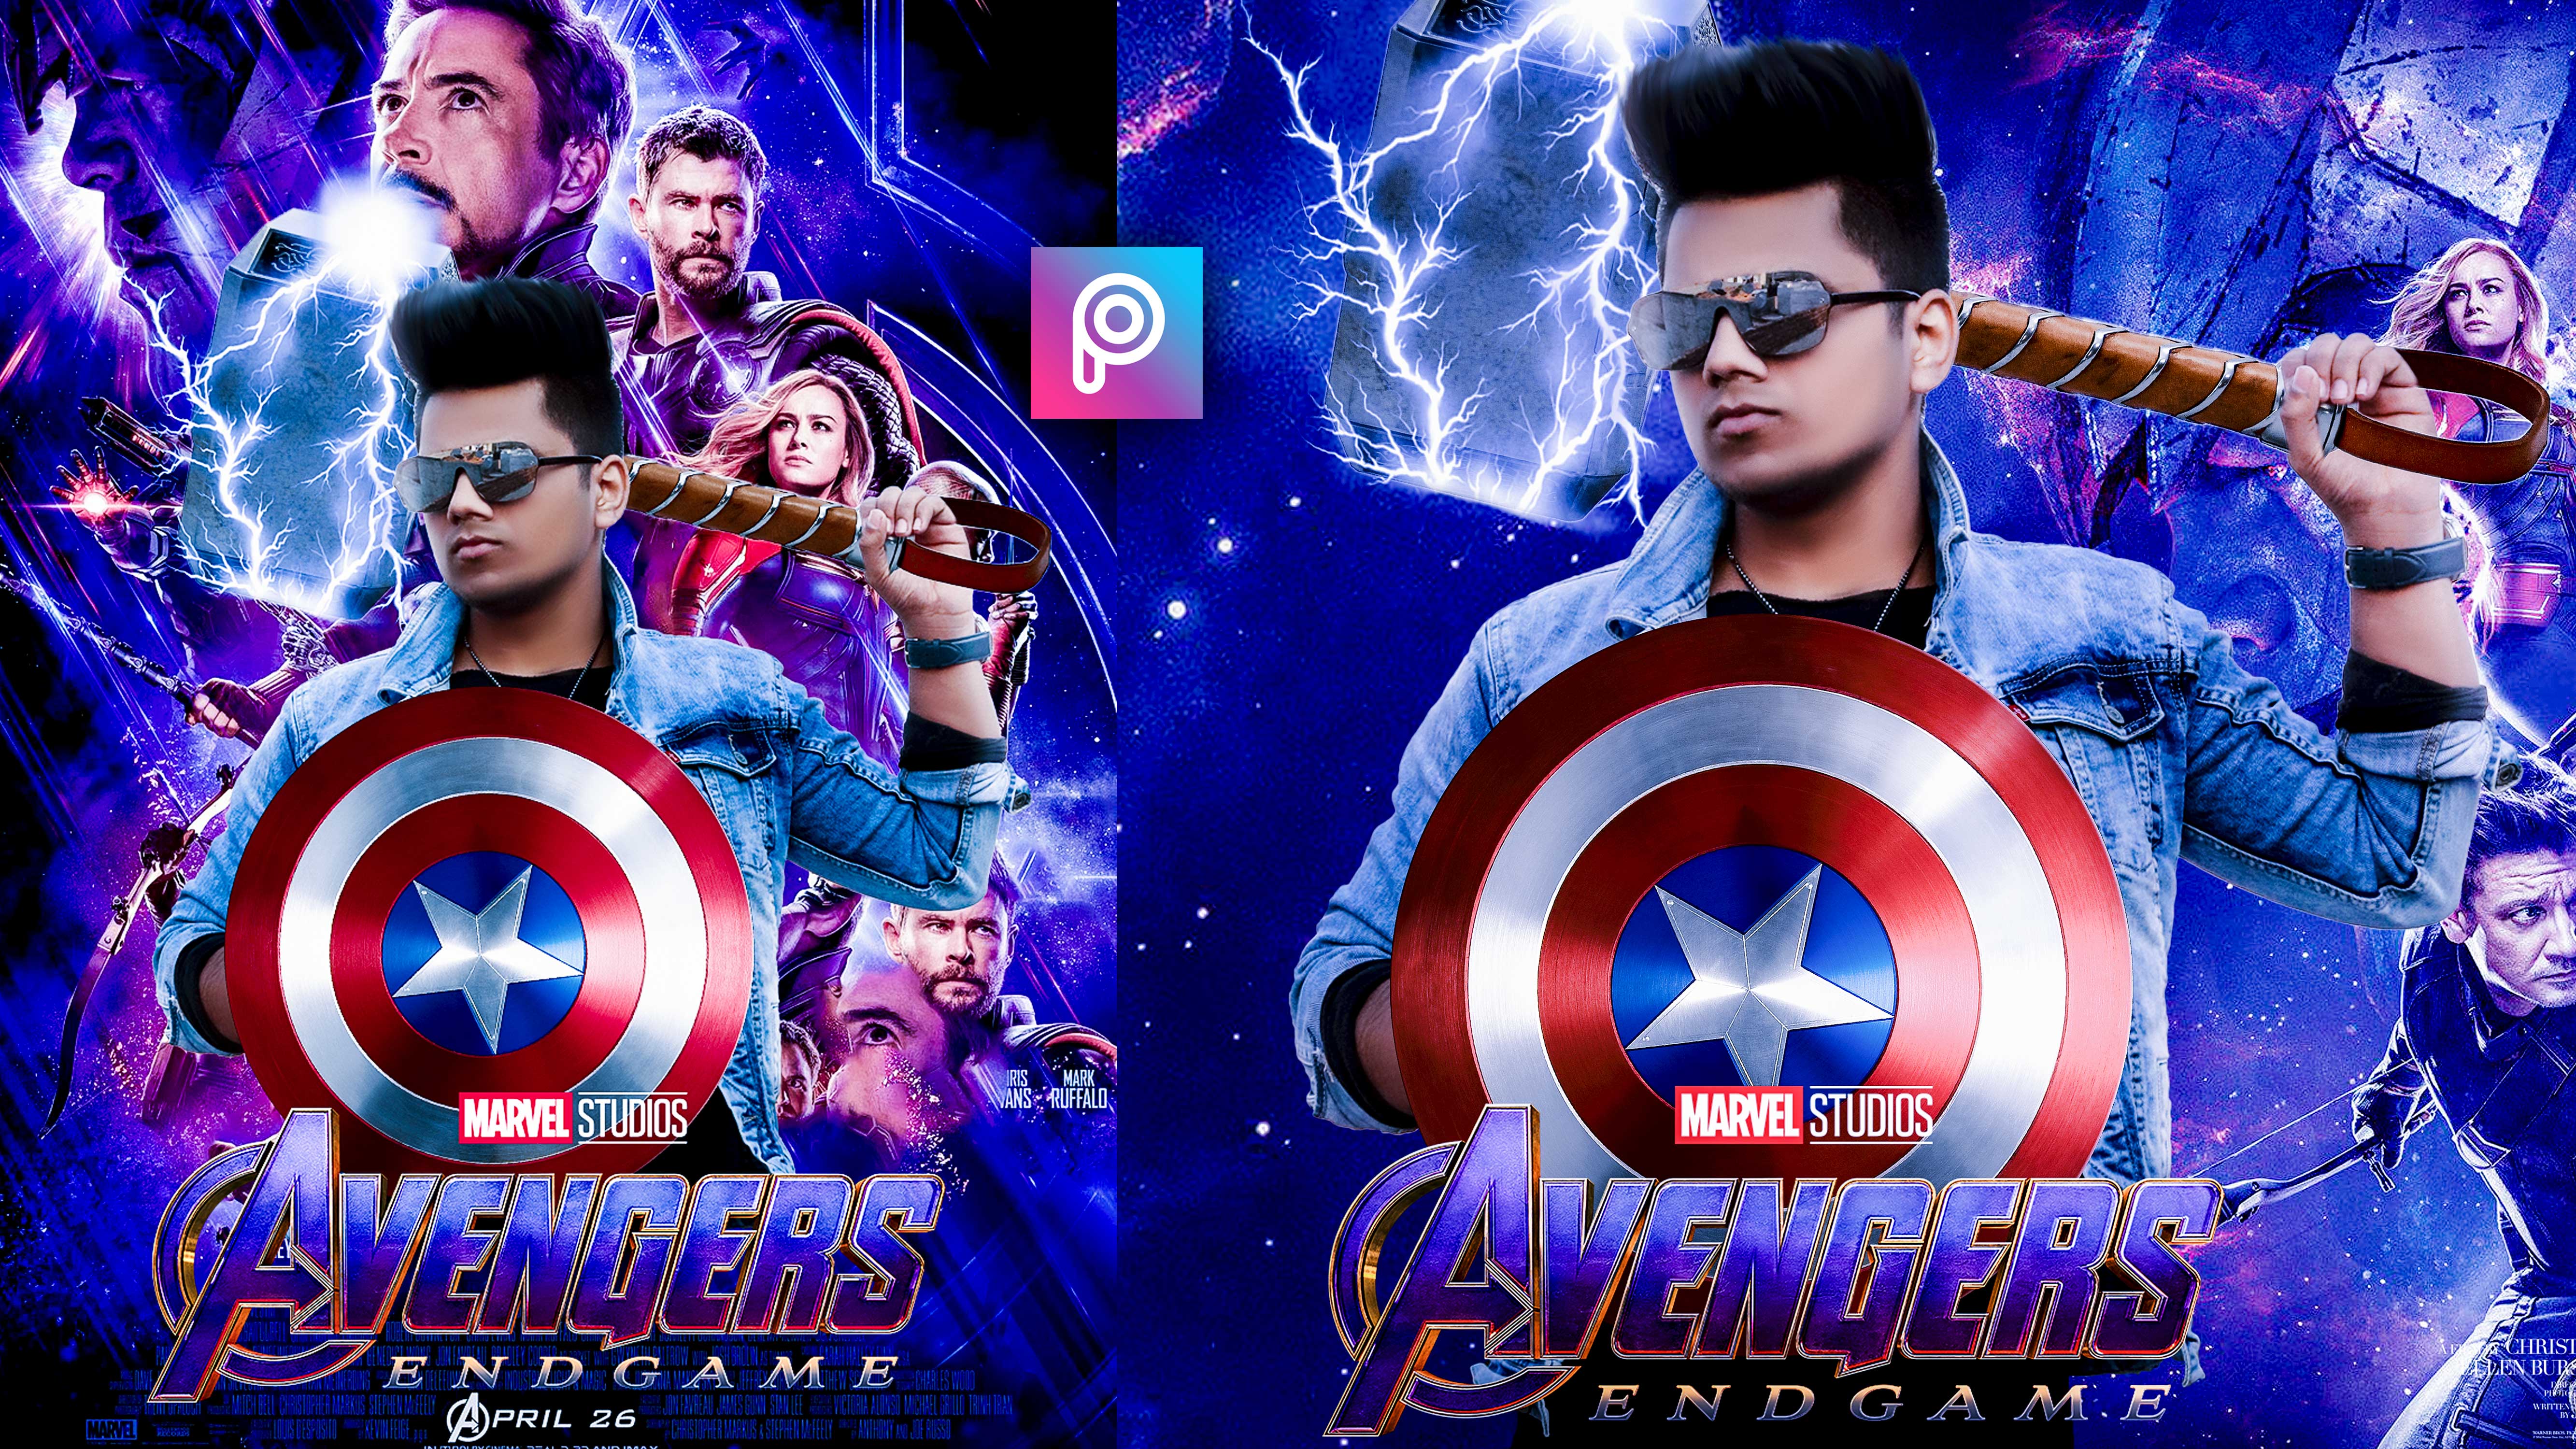 Avengers END GAME Background Png Download for Picsart Photoshop